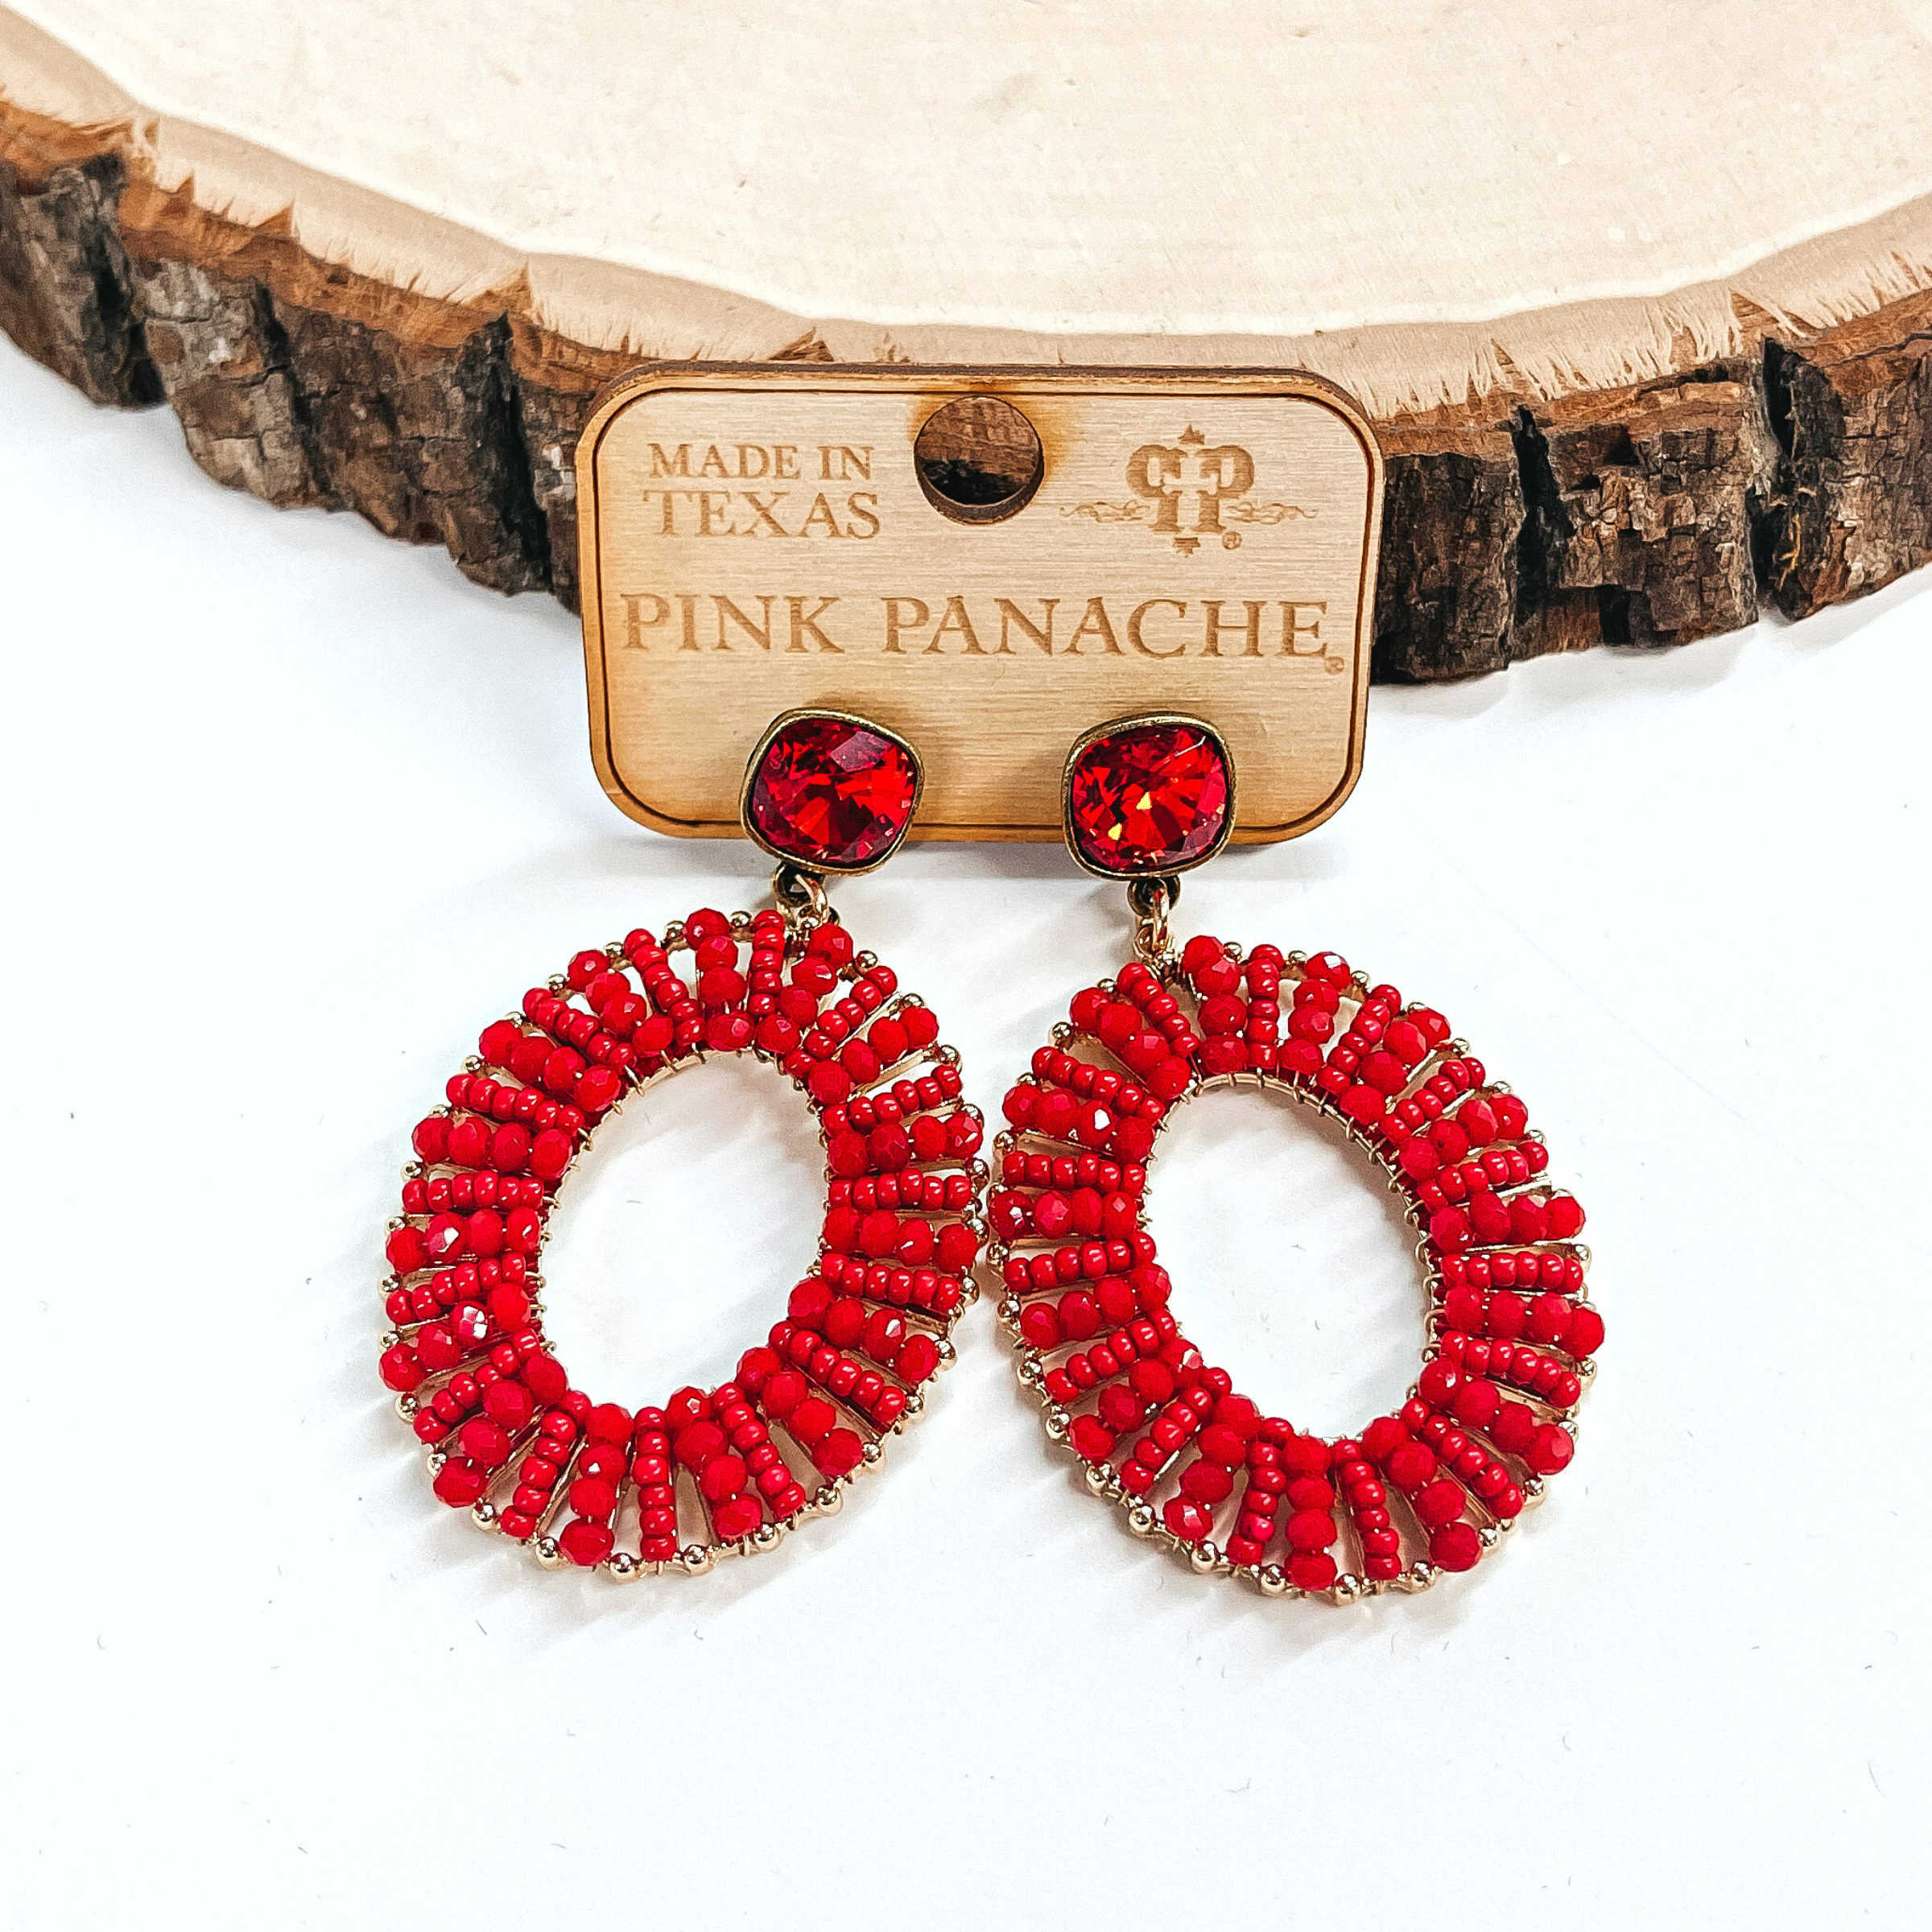 These are red cushion cut post back earrings with an oval drop. The earrings are in a gold setting with small red beads all around the oval. These earrings are taken on a Pink Panache earrings holder. These earrings are taken leaning up against a slab of wood and on a white background.